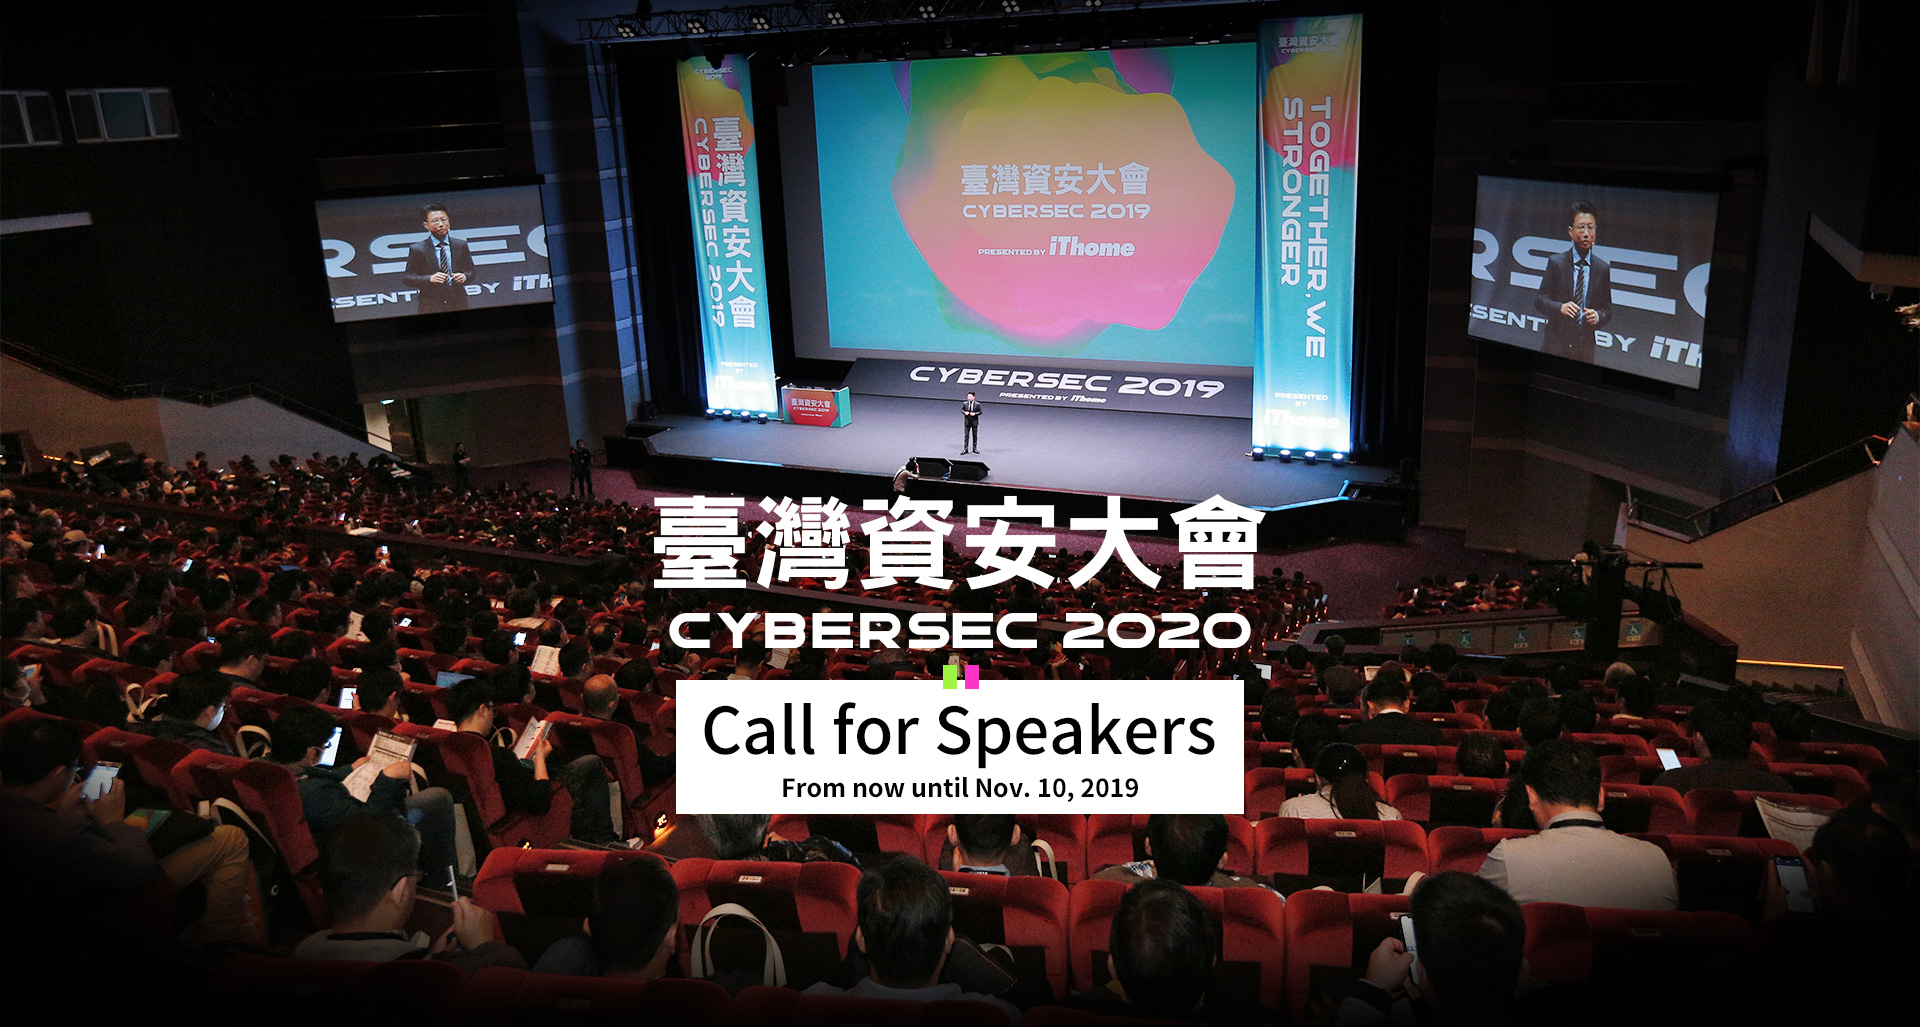 2020 CYBERSEC Call for Speakers